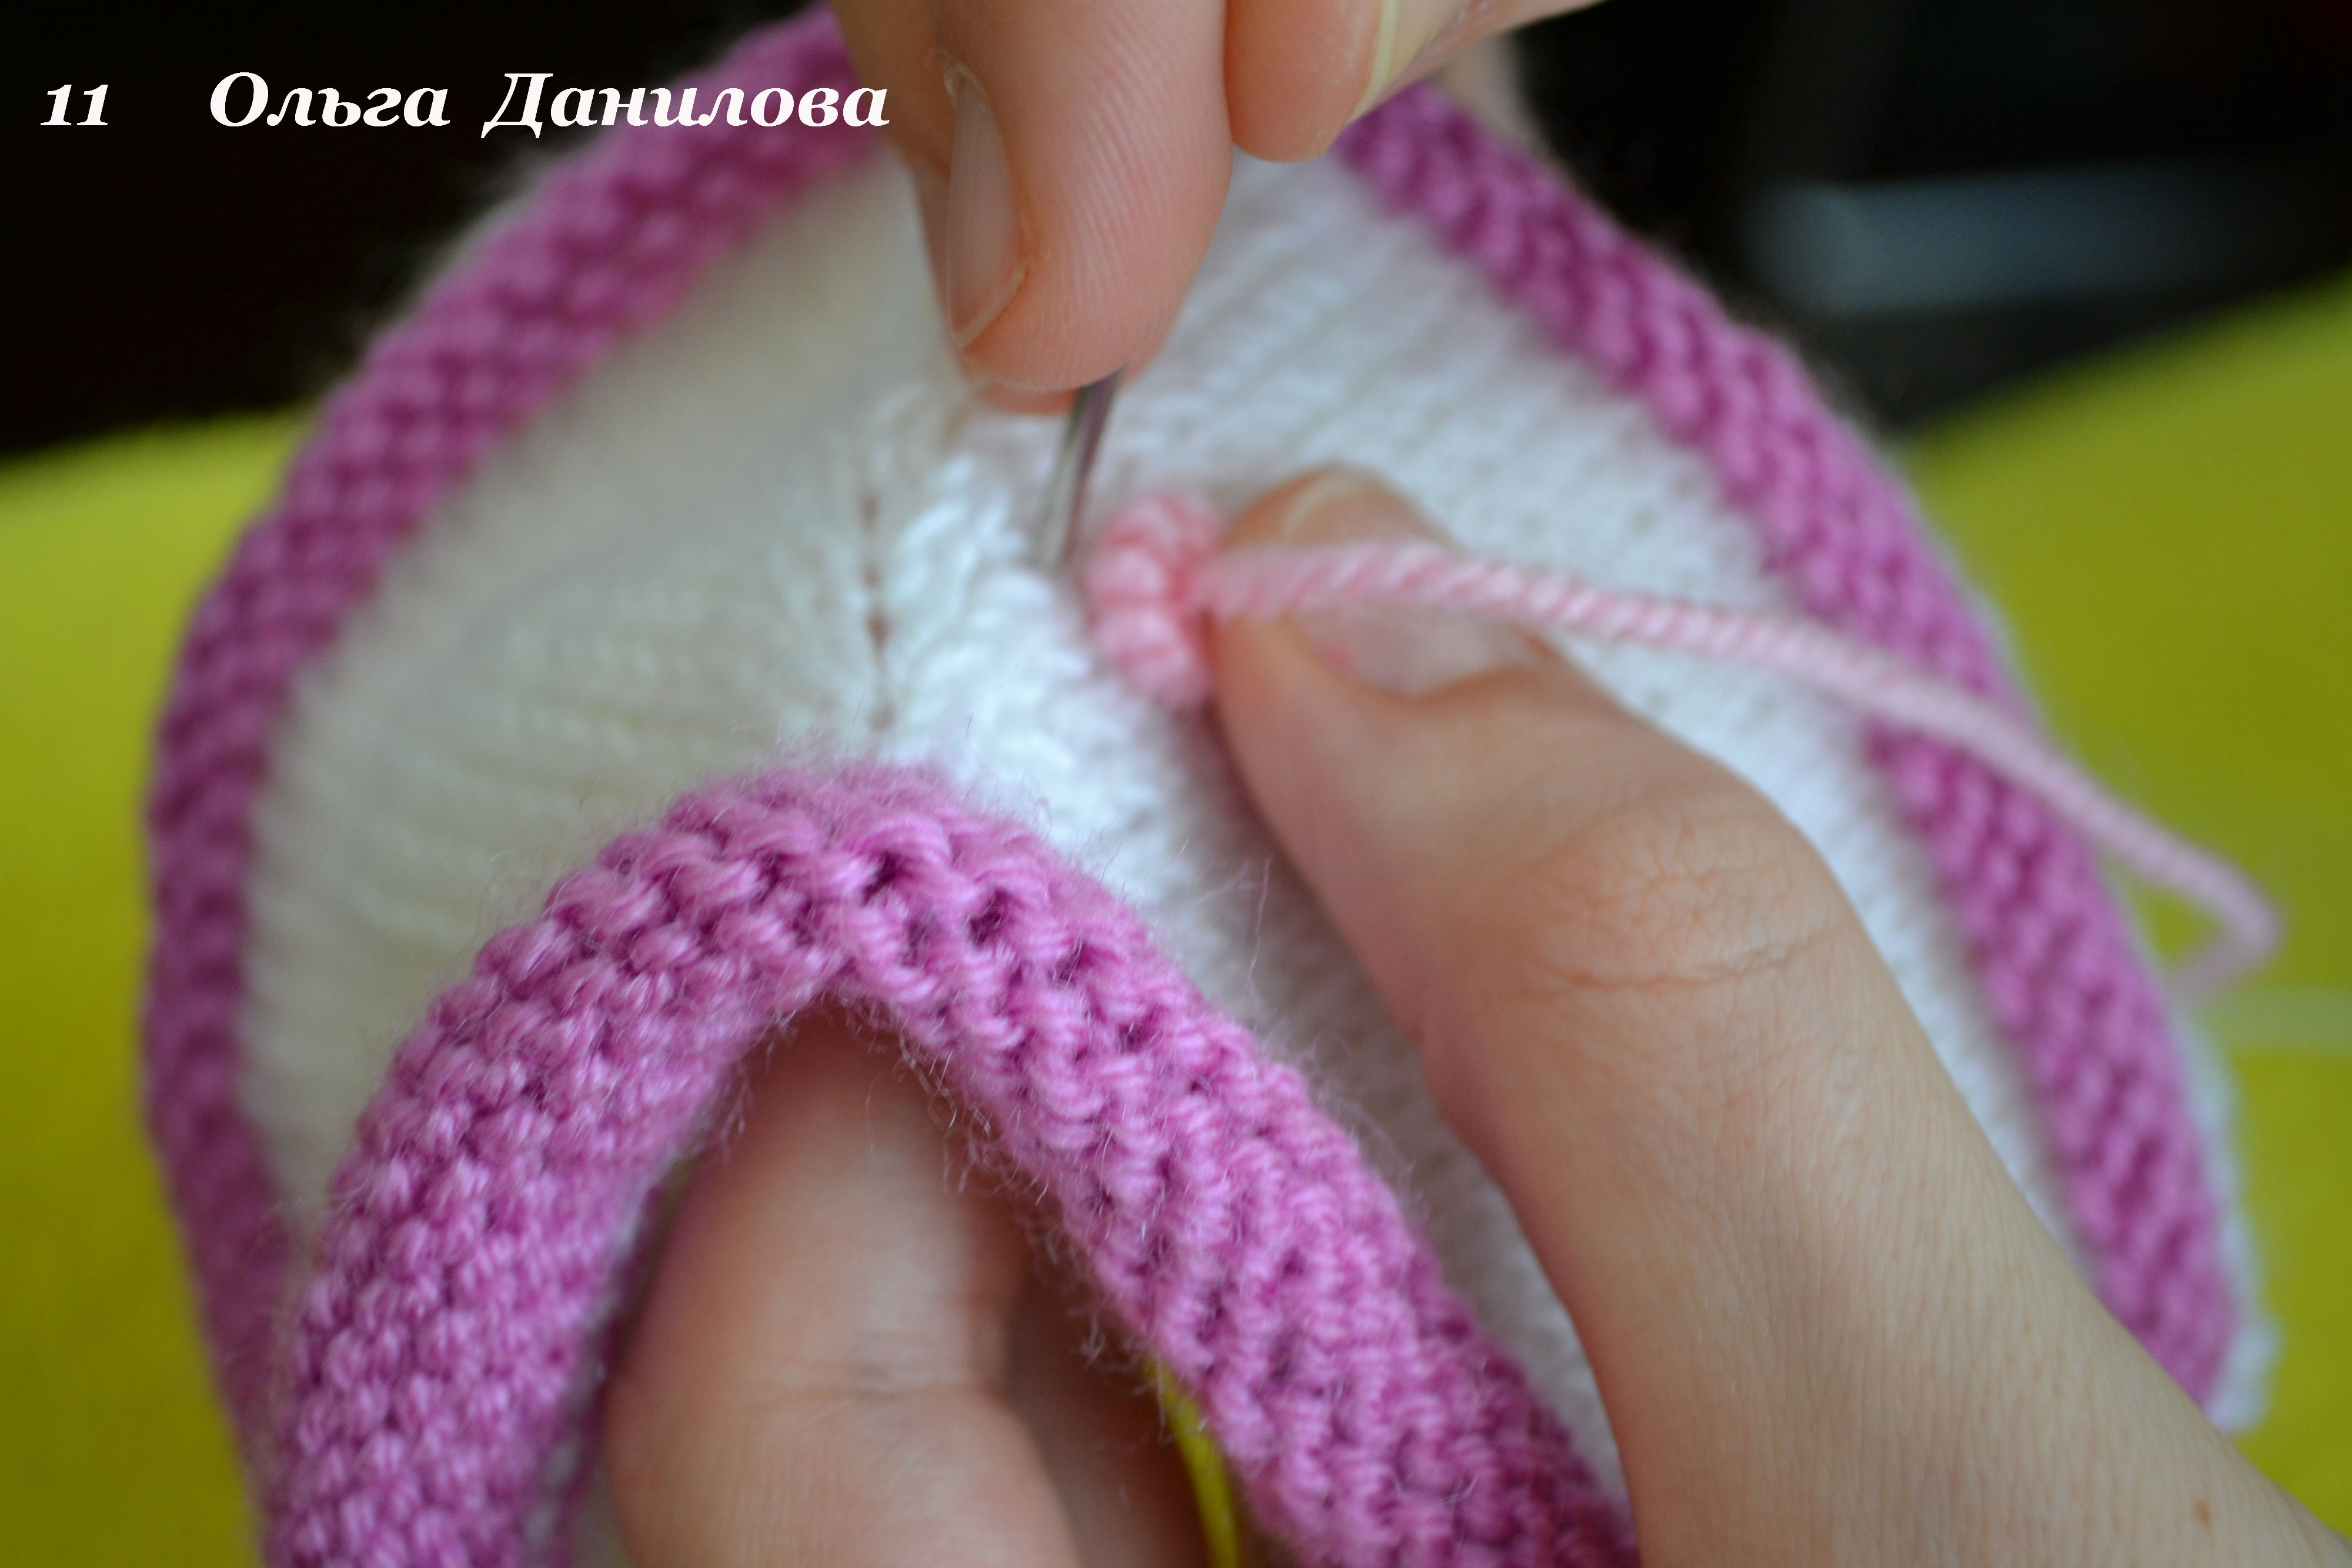 How-to-Make-Pretty-Knitted-Baby-Booties-13.jpg